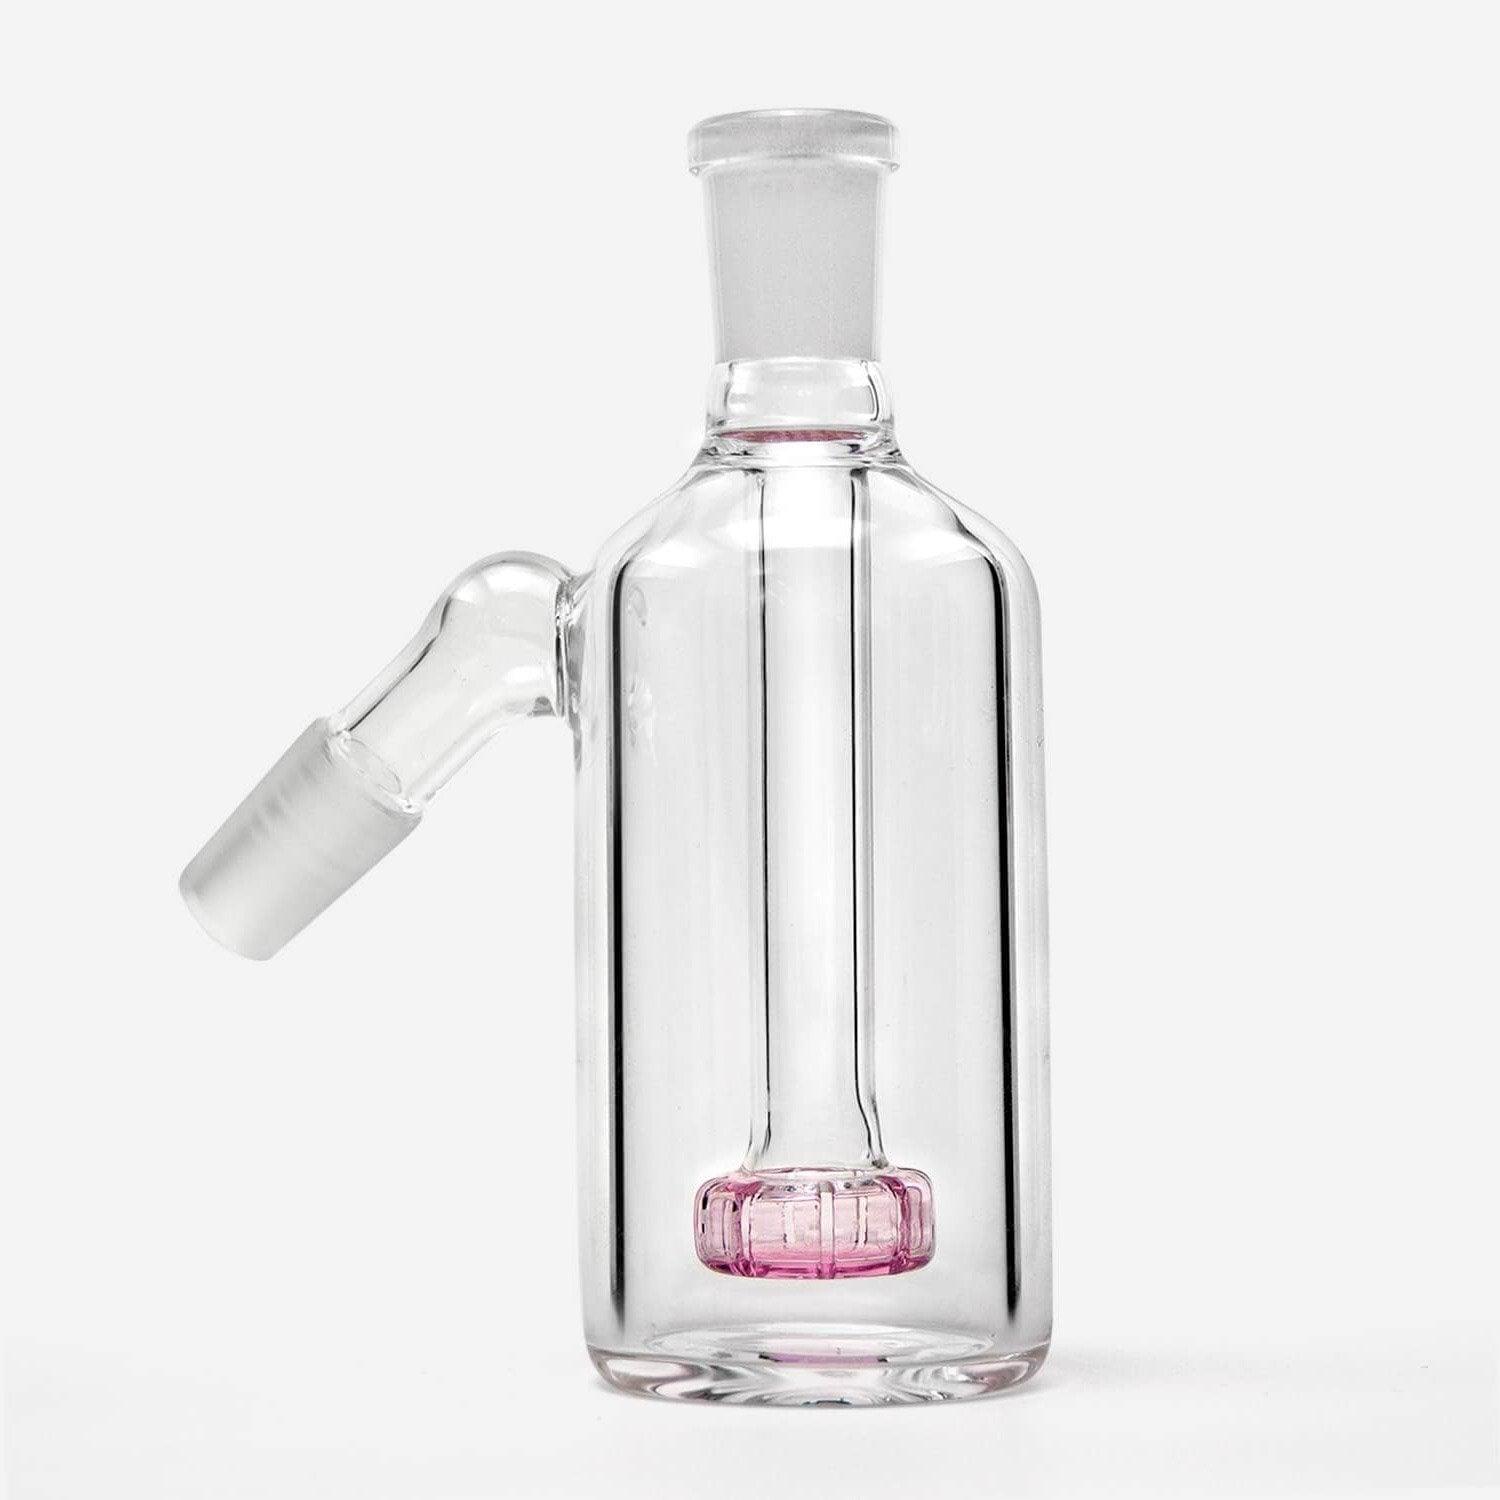 14mm Ash Catcher 45˚ (ONLINE ONLY)